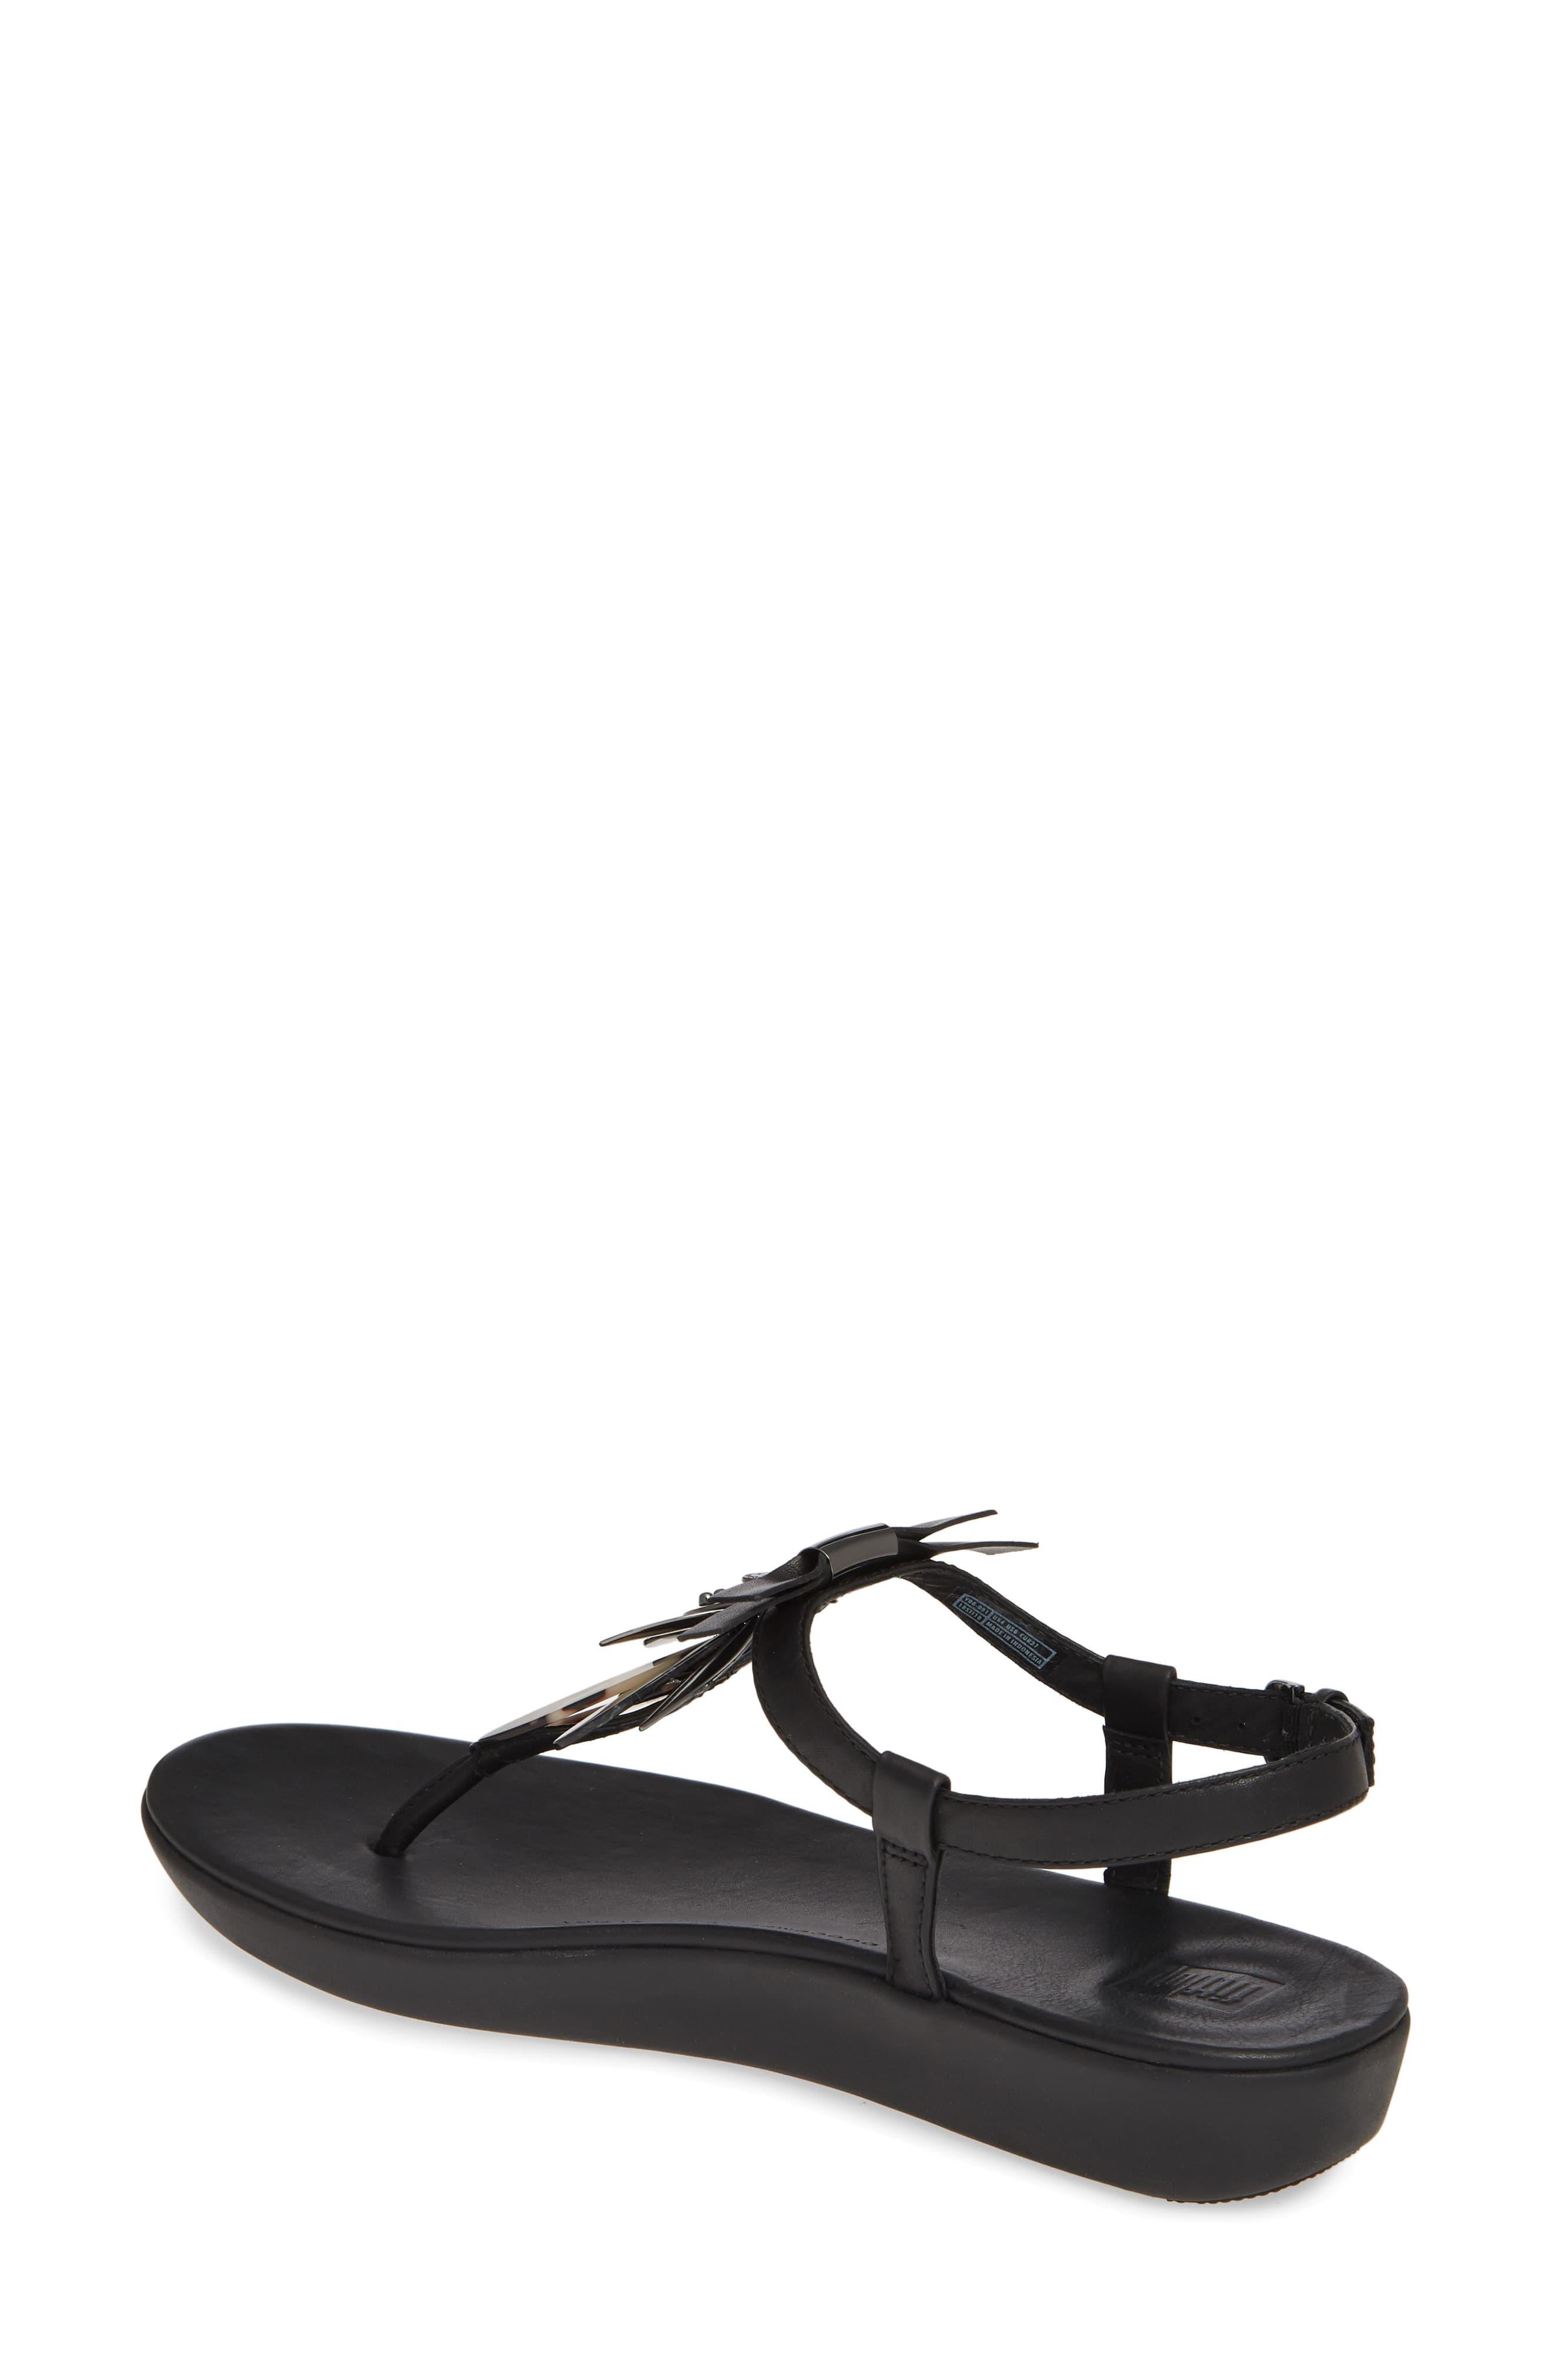 Fitflop Tia Dragonfly Sandal in Black - Lyst